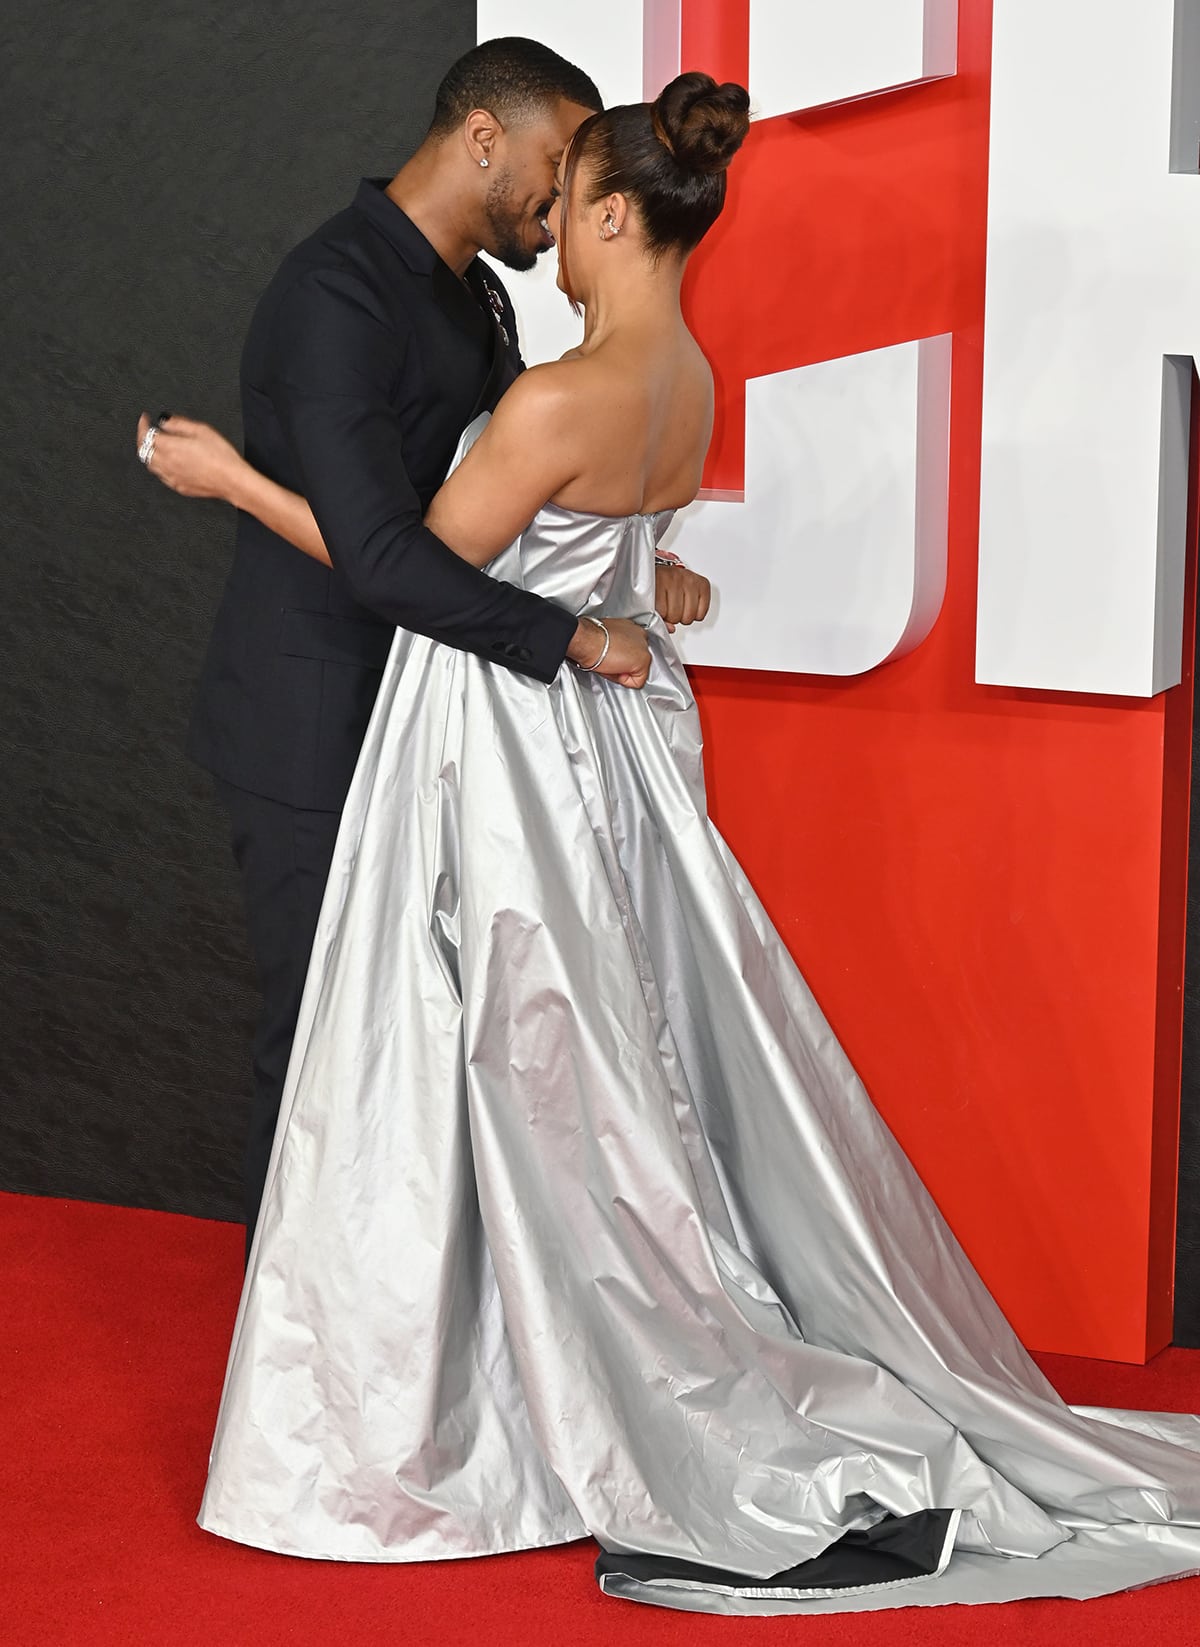 Michael B. Jordan and Tessa Thompson appear to be packing on some PDA on the red carpet